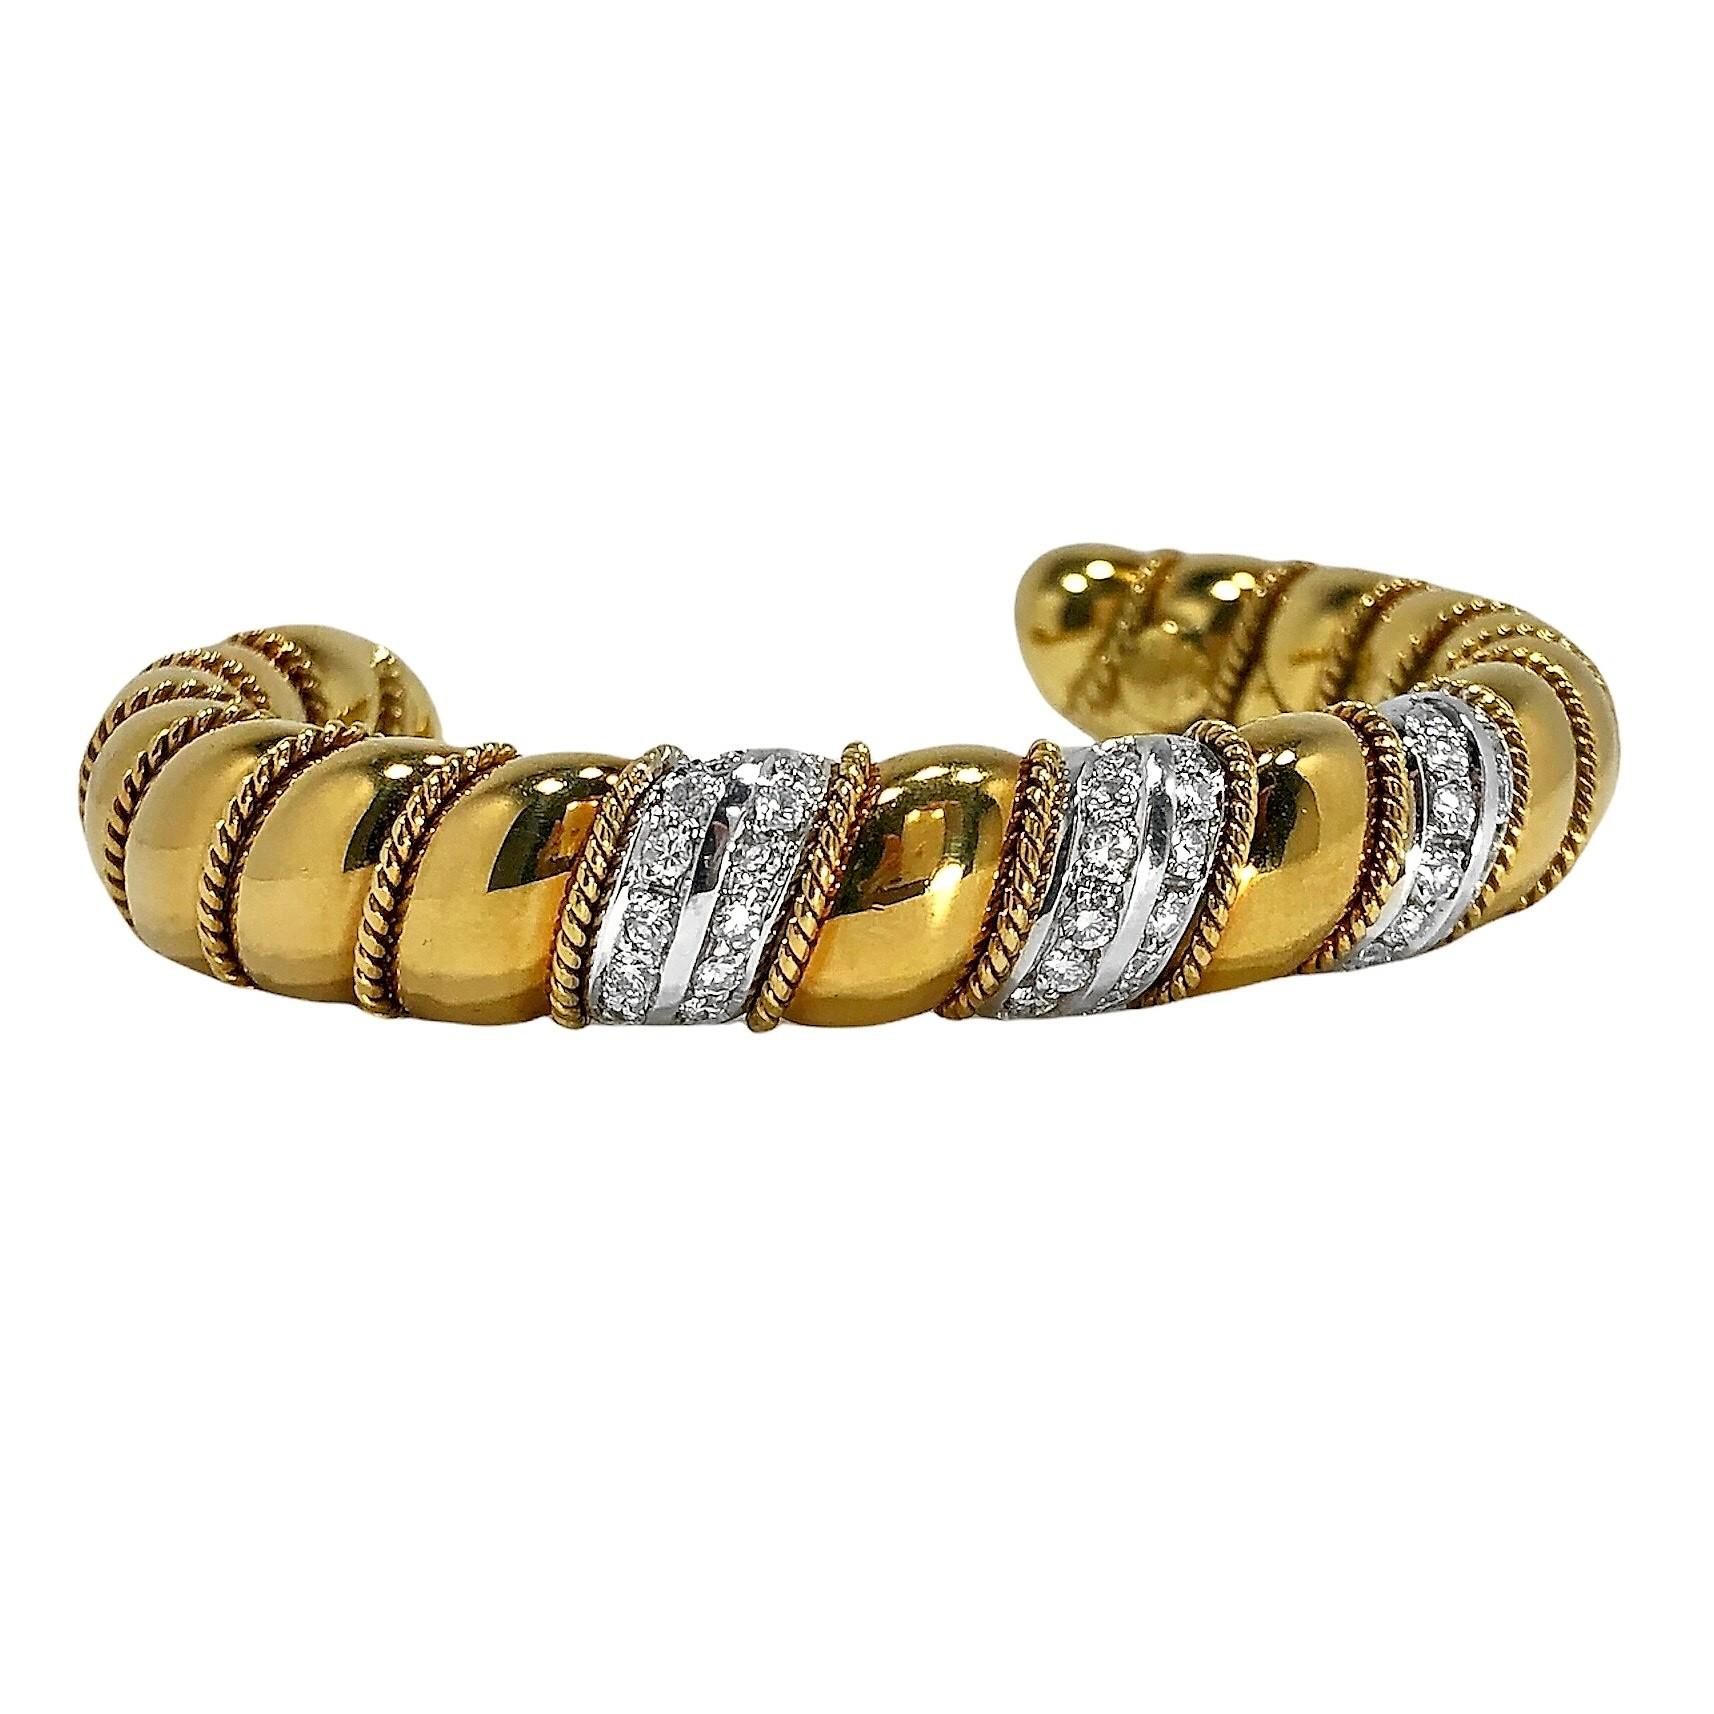 Contemporary Vintage Sabbadini 18k Yellow and White Gold  Bangle Bracelet with Diamonds For Sale